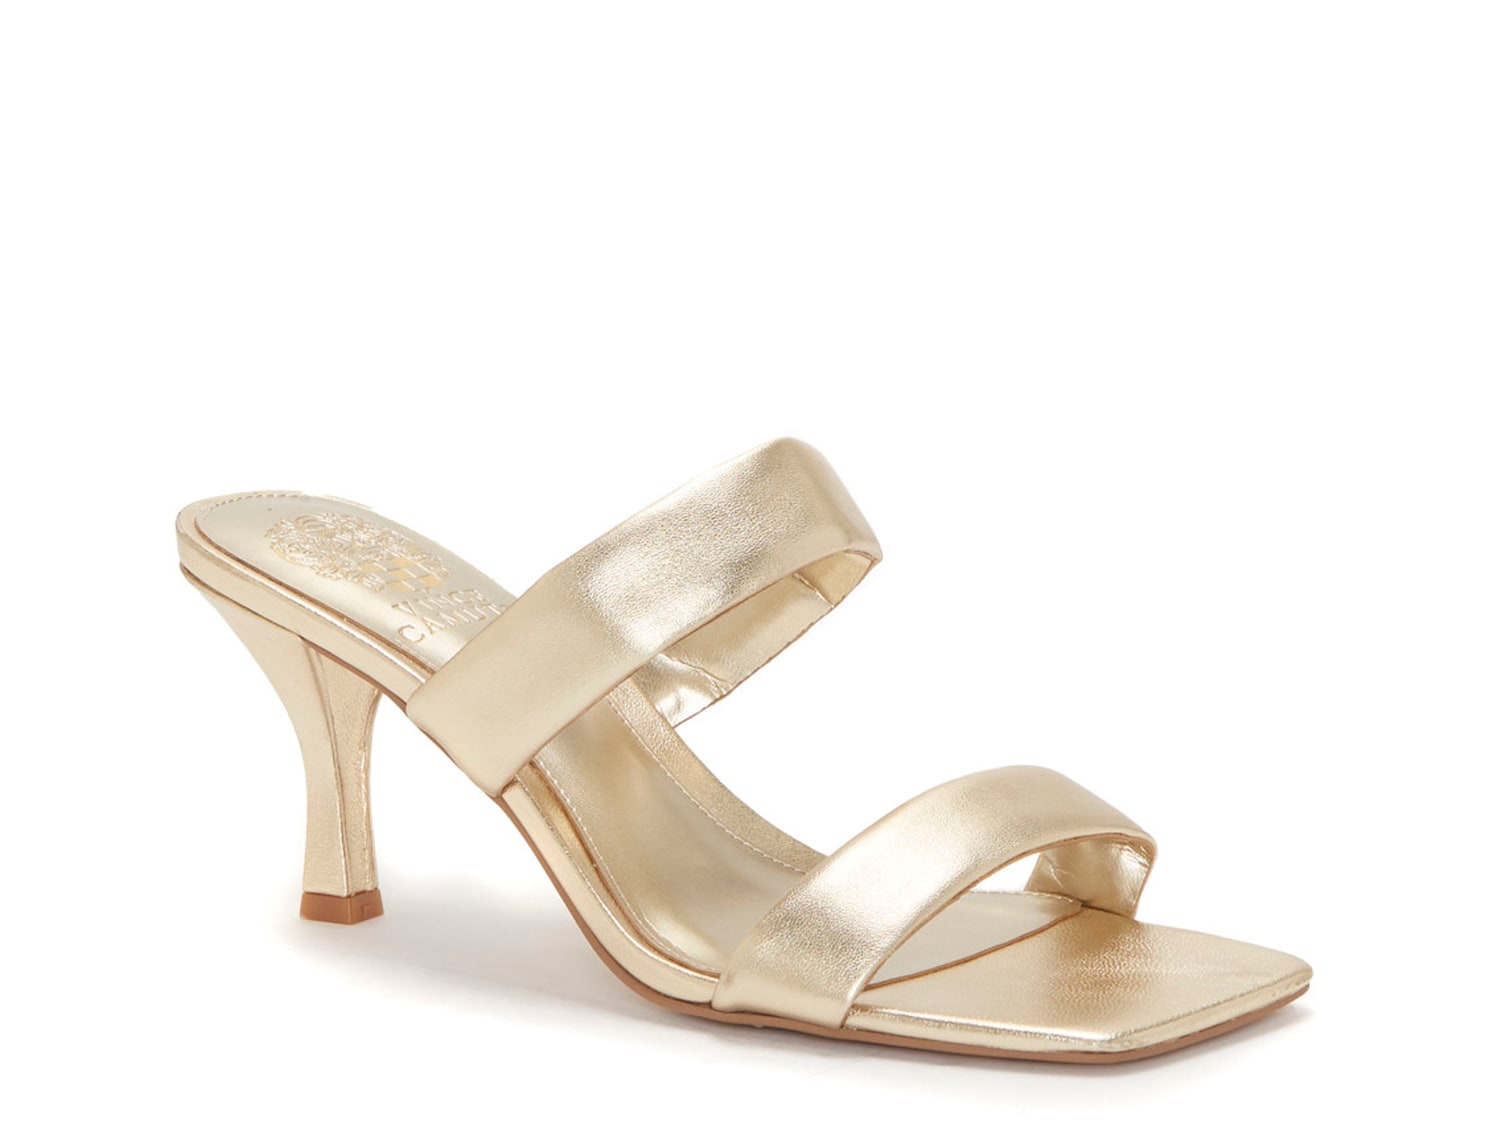 Vince Camuto Women's Aslee Square Toe Dress Sandals